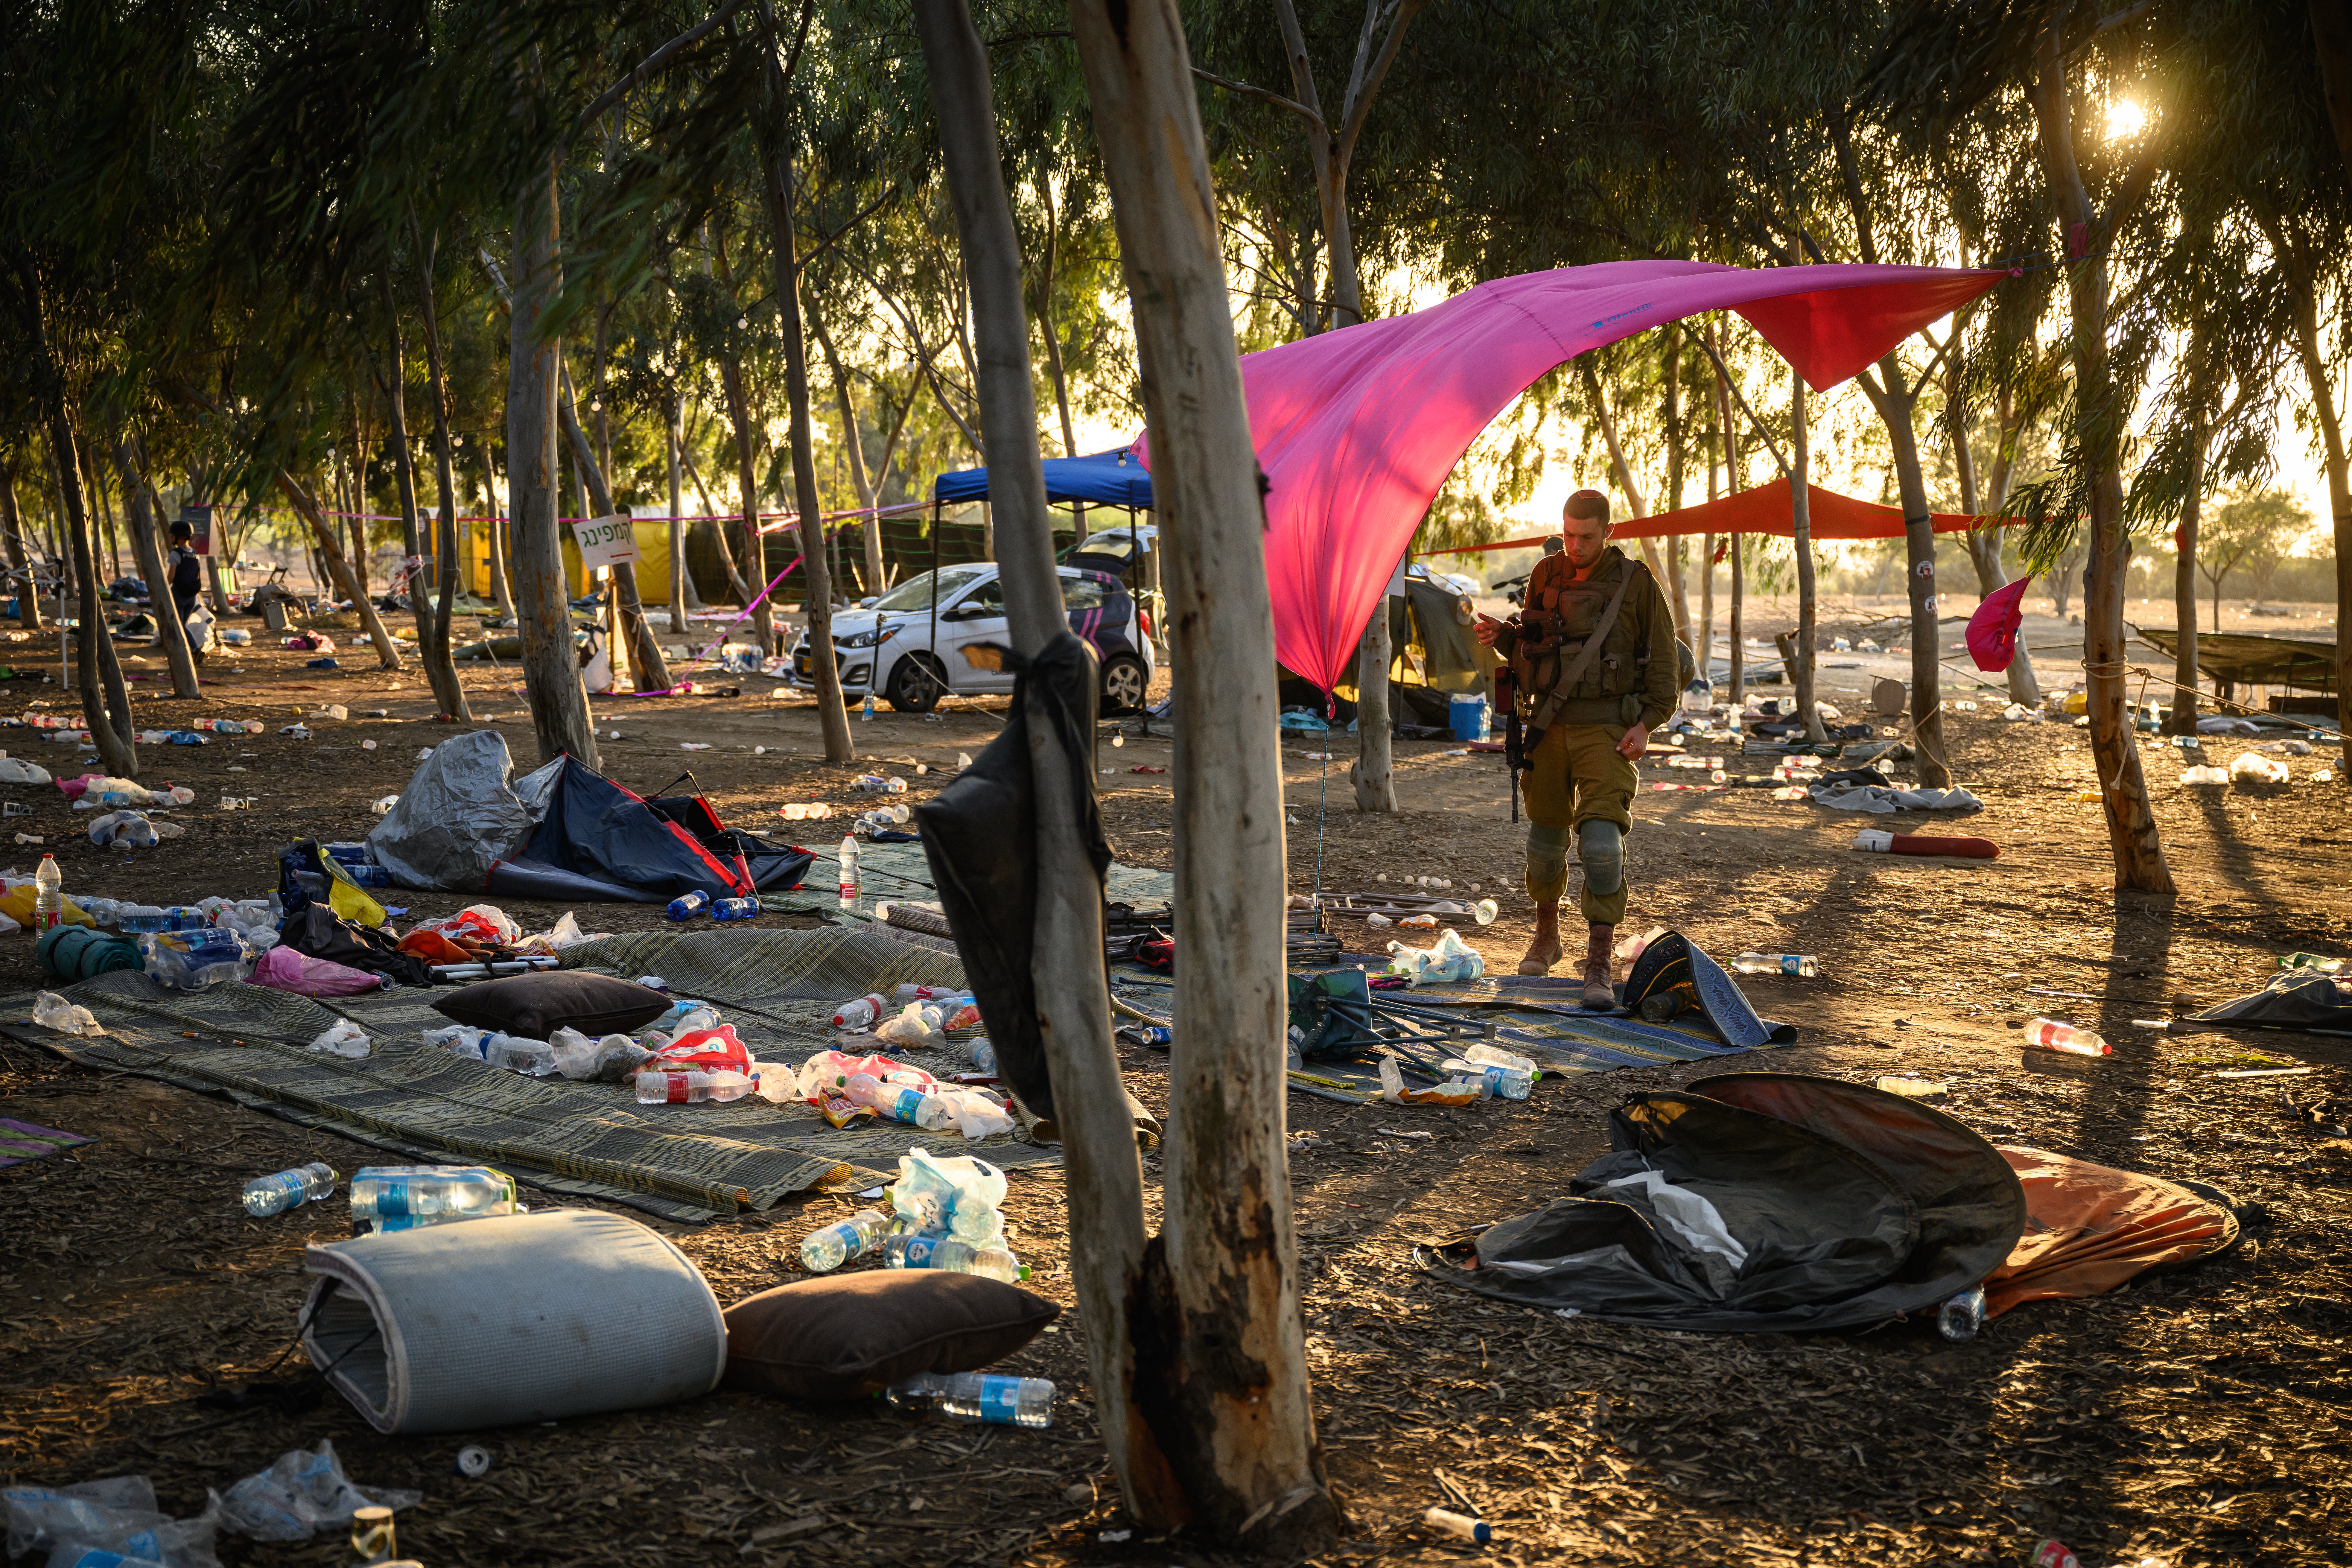 Search at the Israel festival site for survivors and personal effects